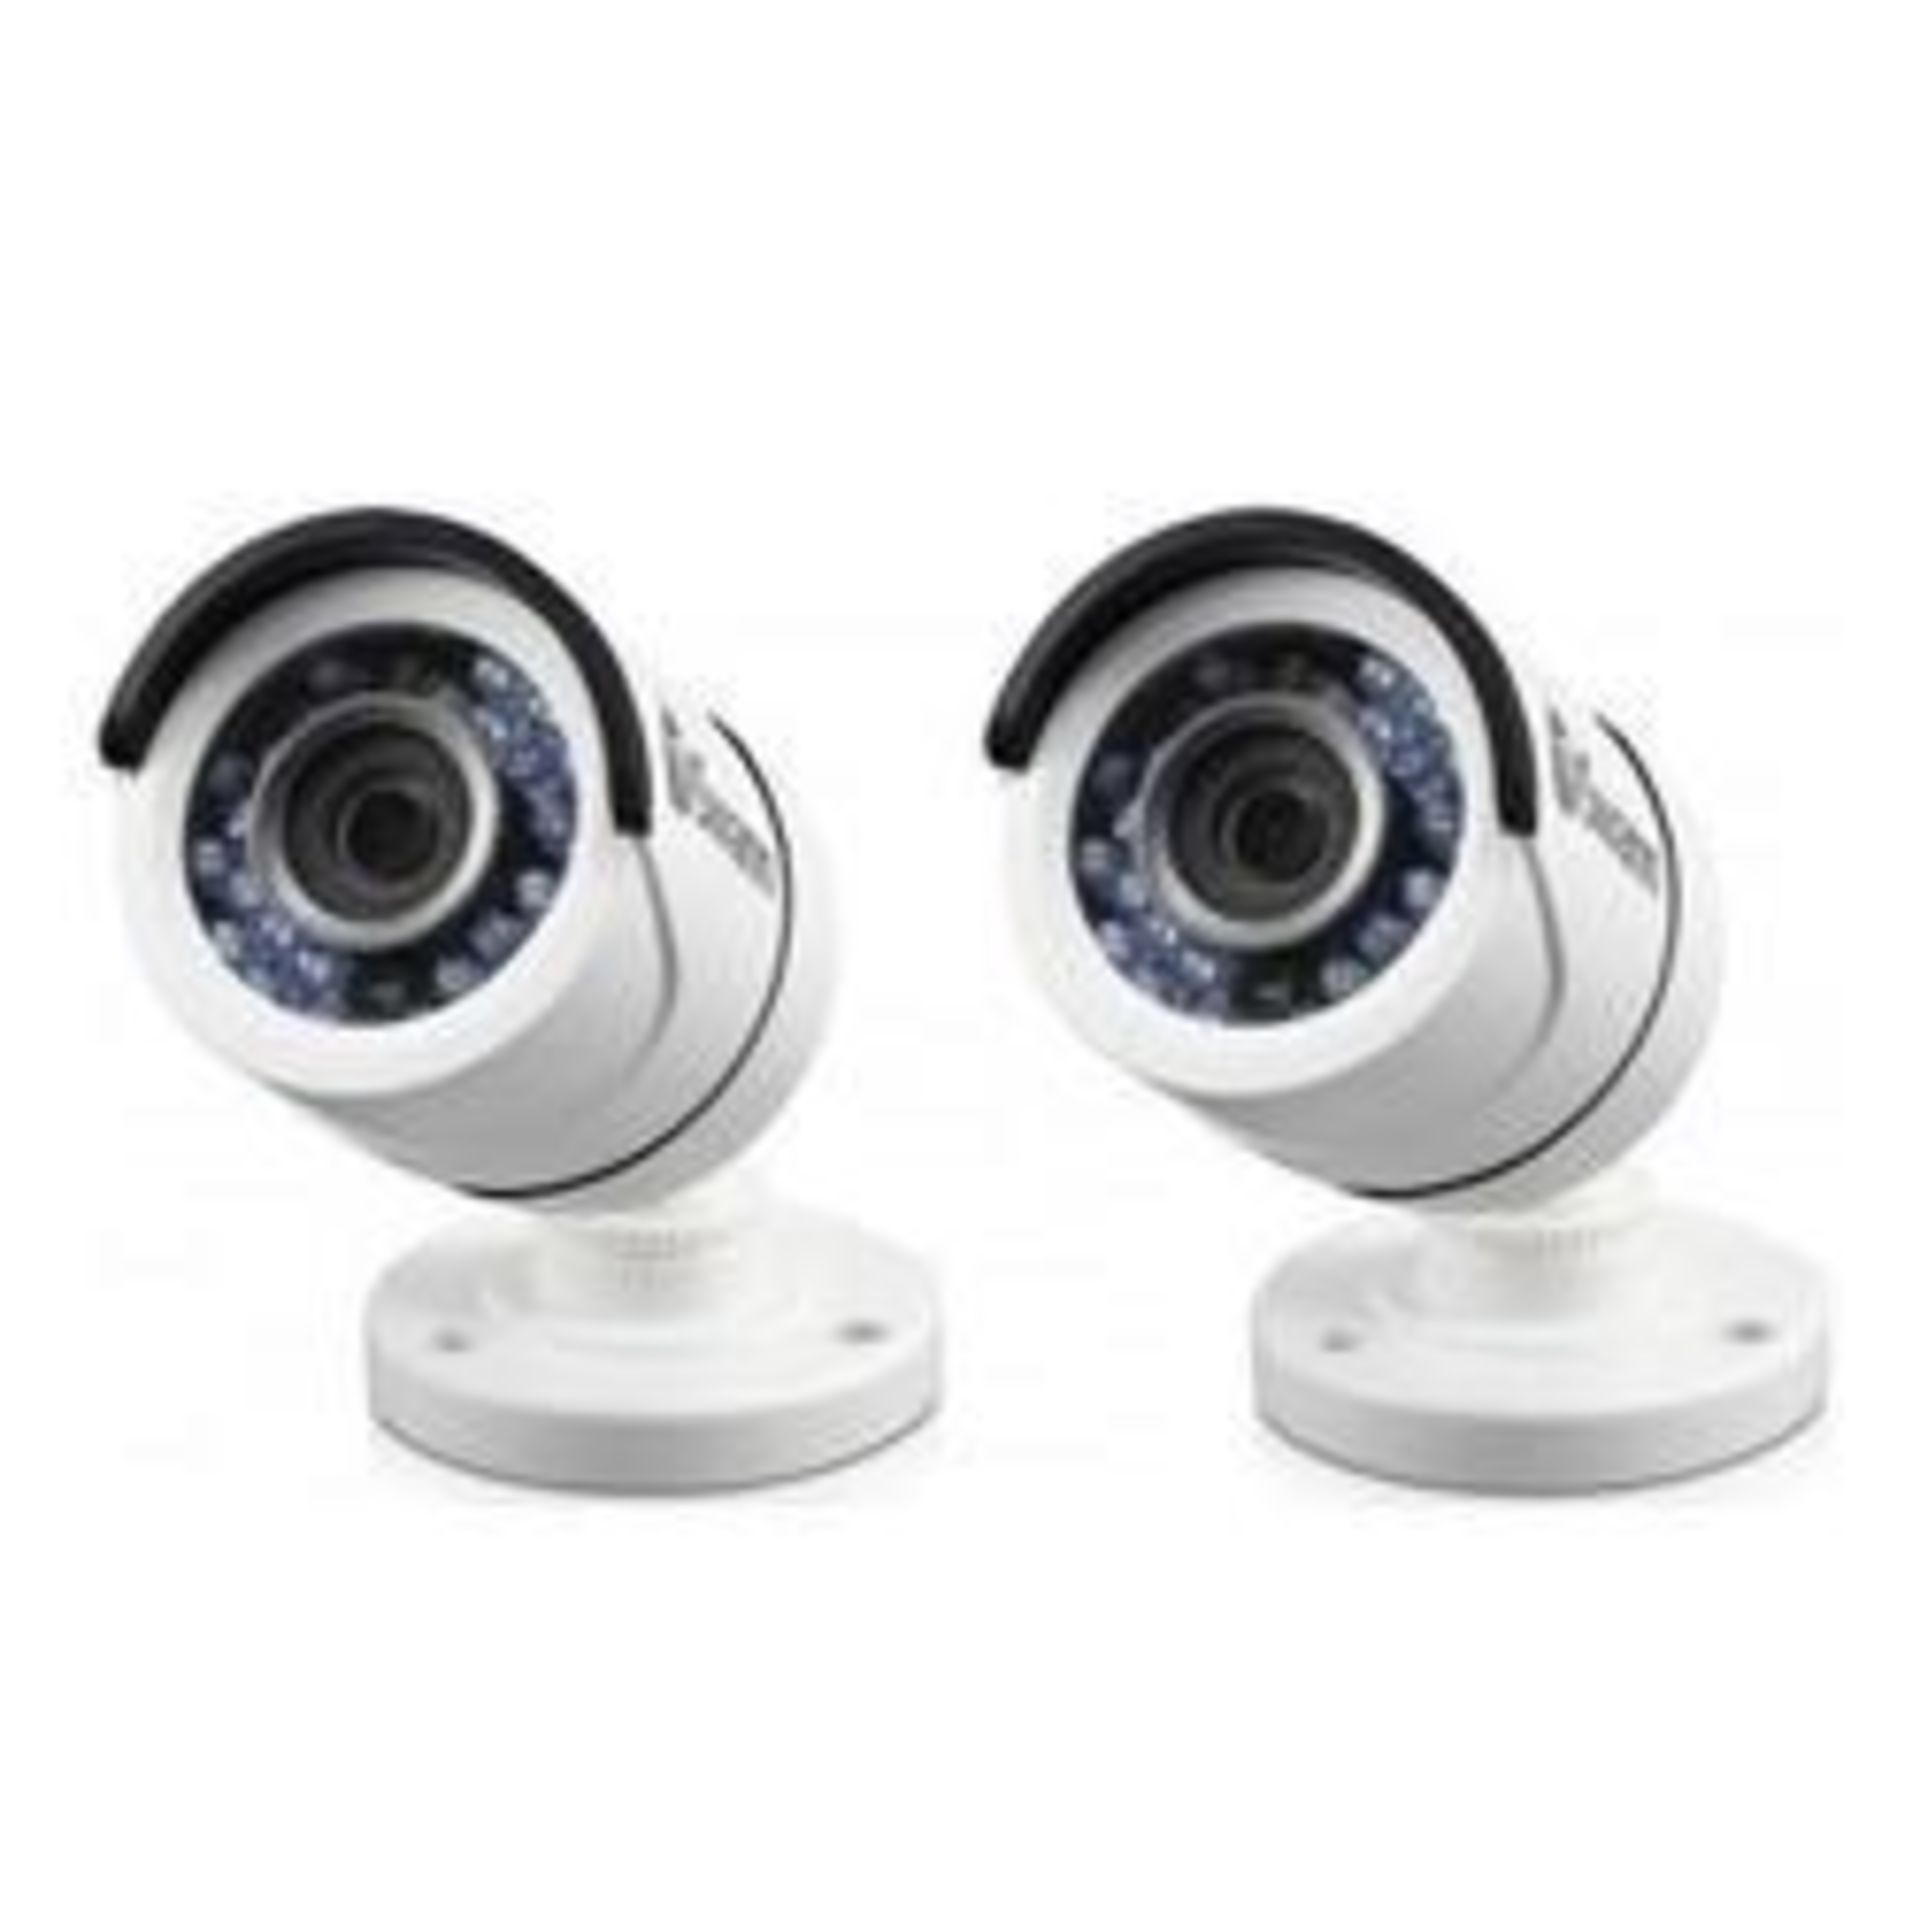 V Grade A Swann Pro-T853 Pack of Two 1080P HD Bullet Cameras - 30 Meter Night Vision - Day/Night -